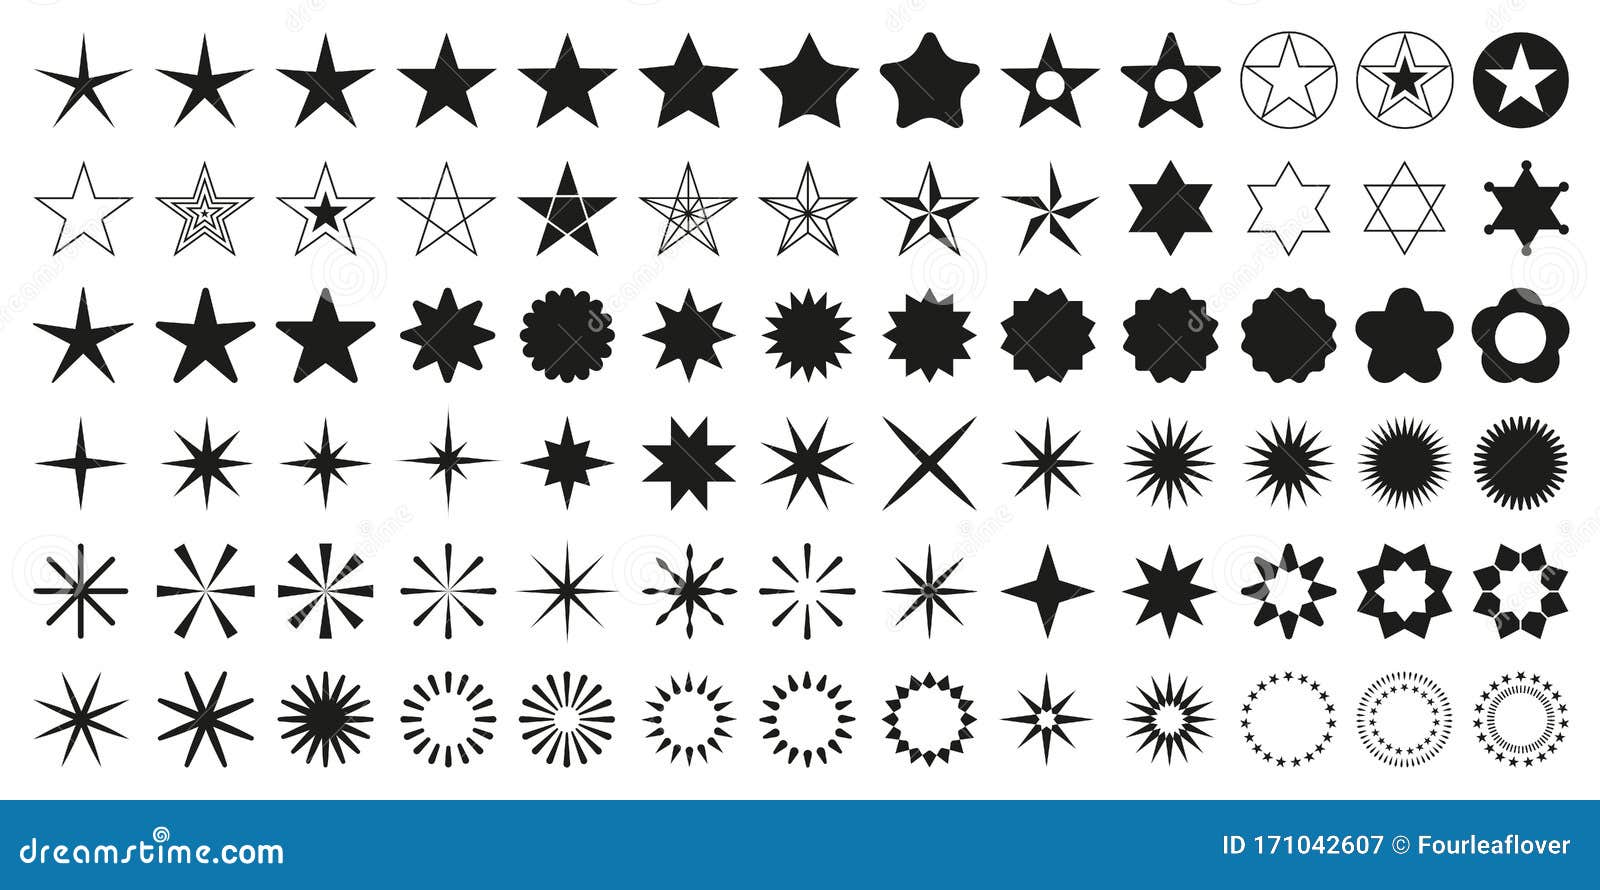 stars set of 78 black icons. rating star icon. star  collection.